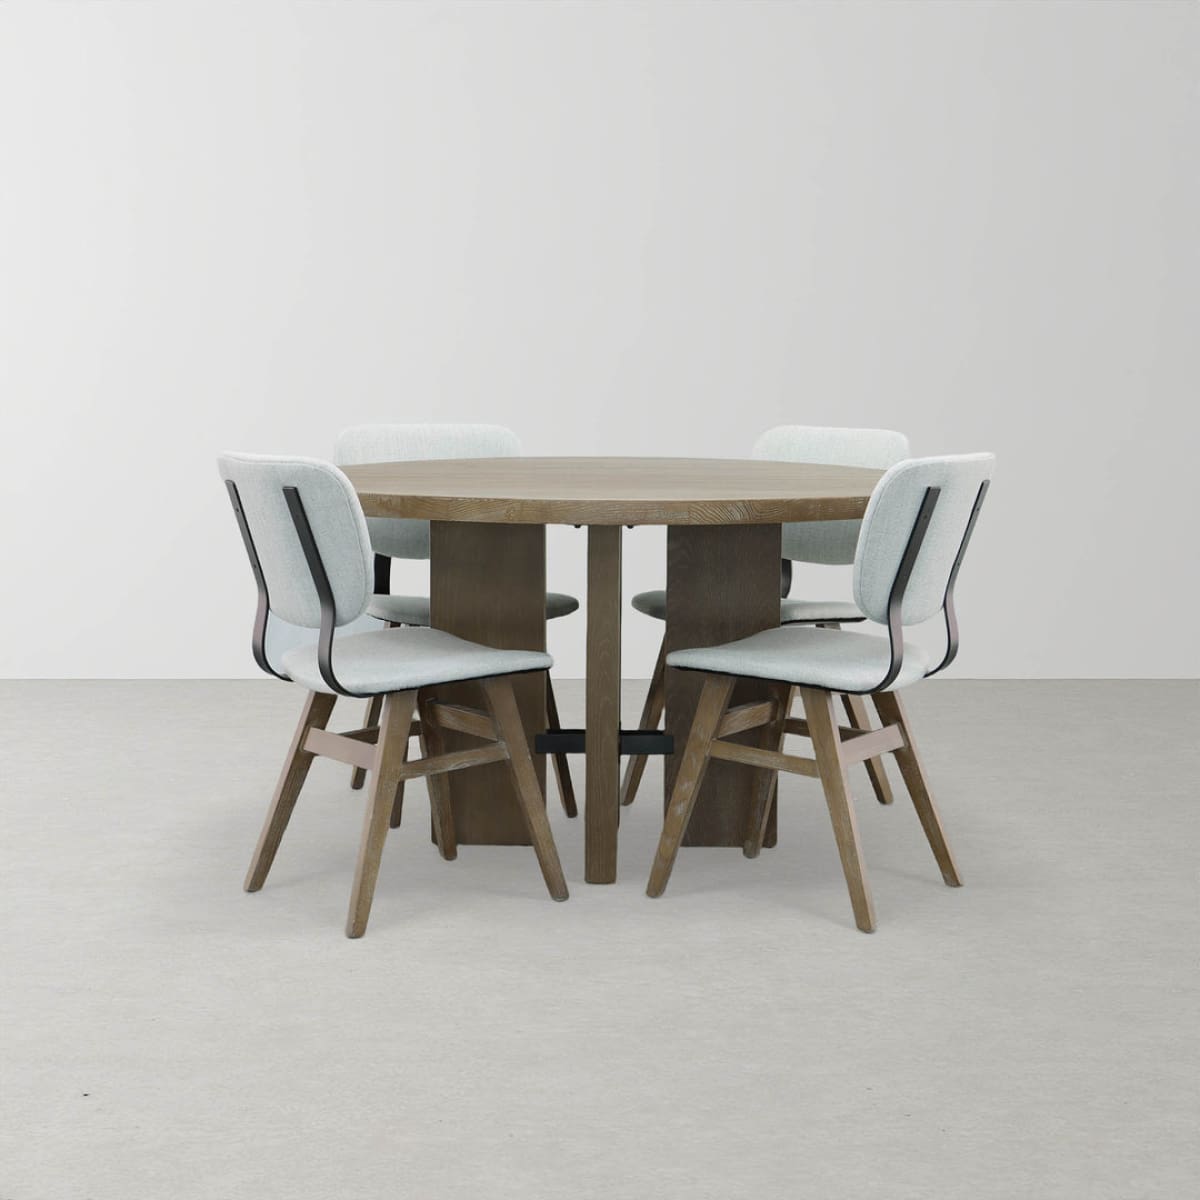 Fraser Round Dining Table - lh-import-dining-tables